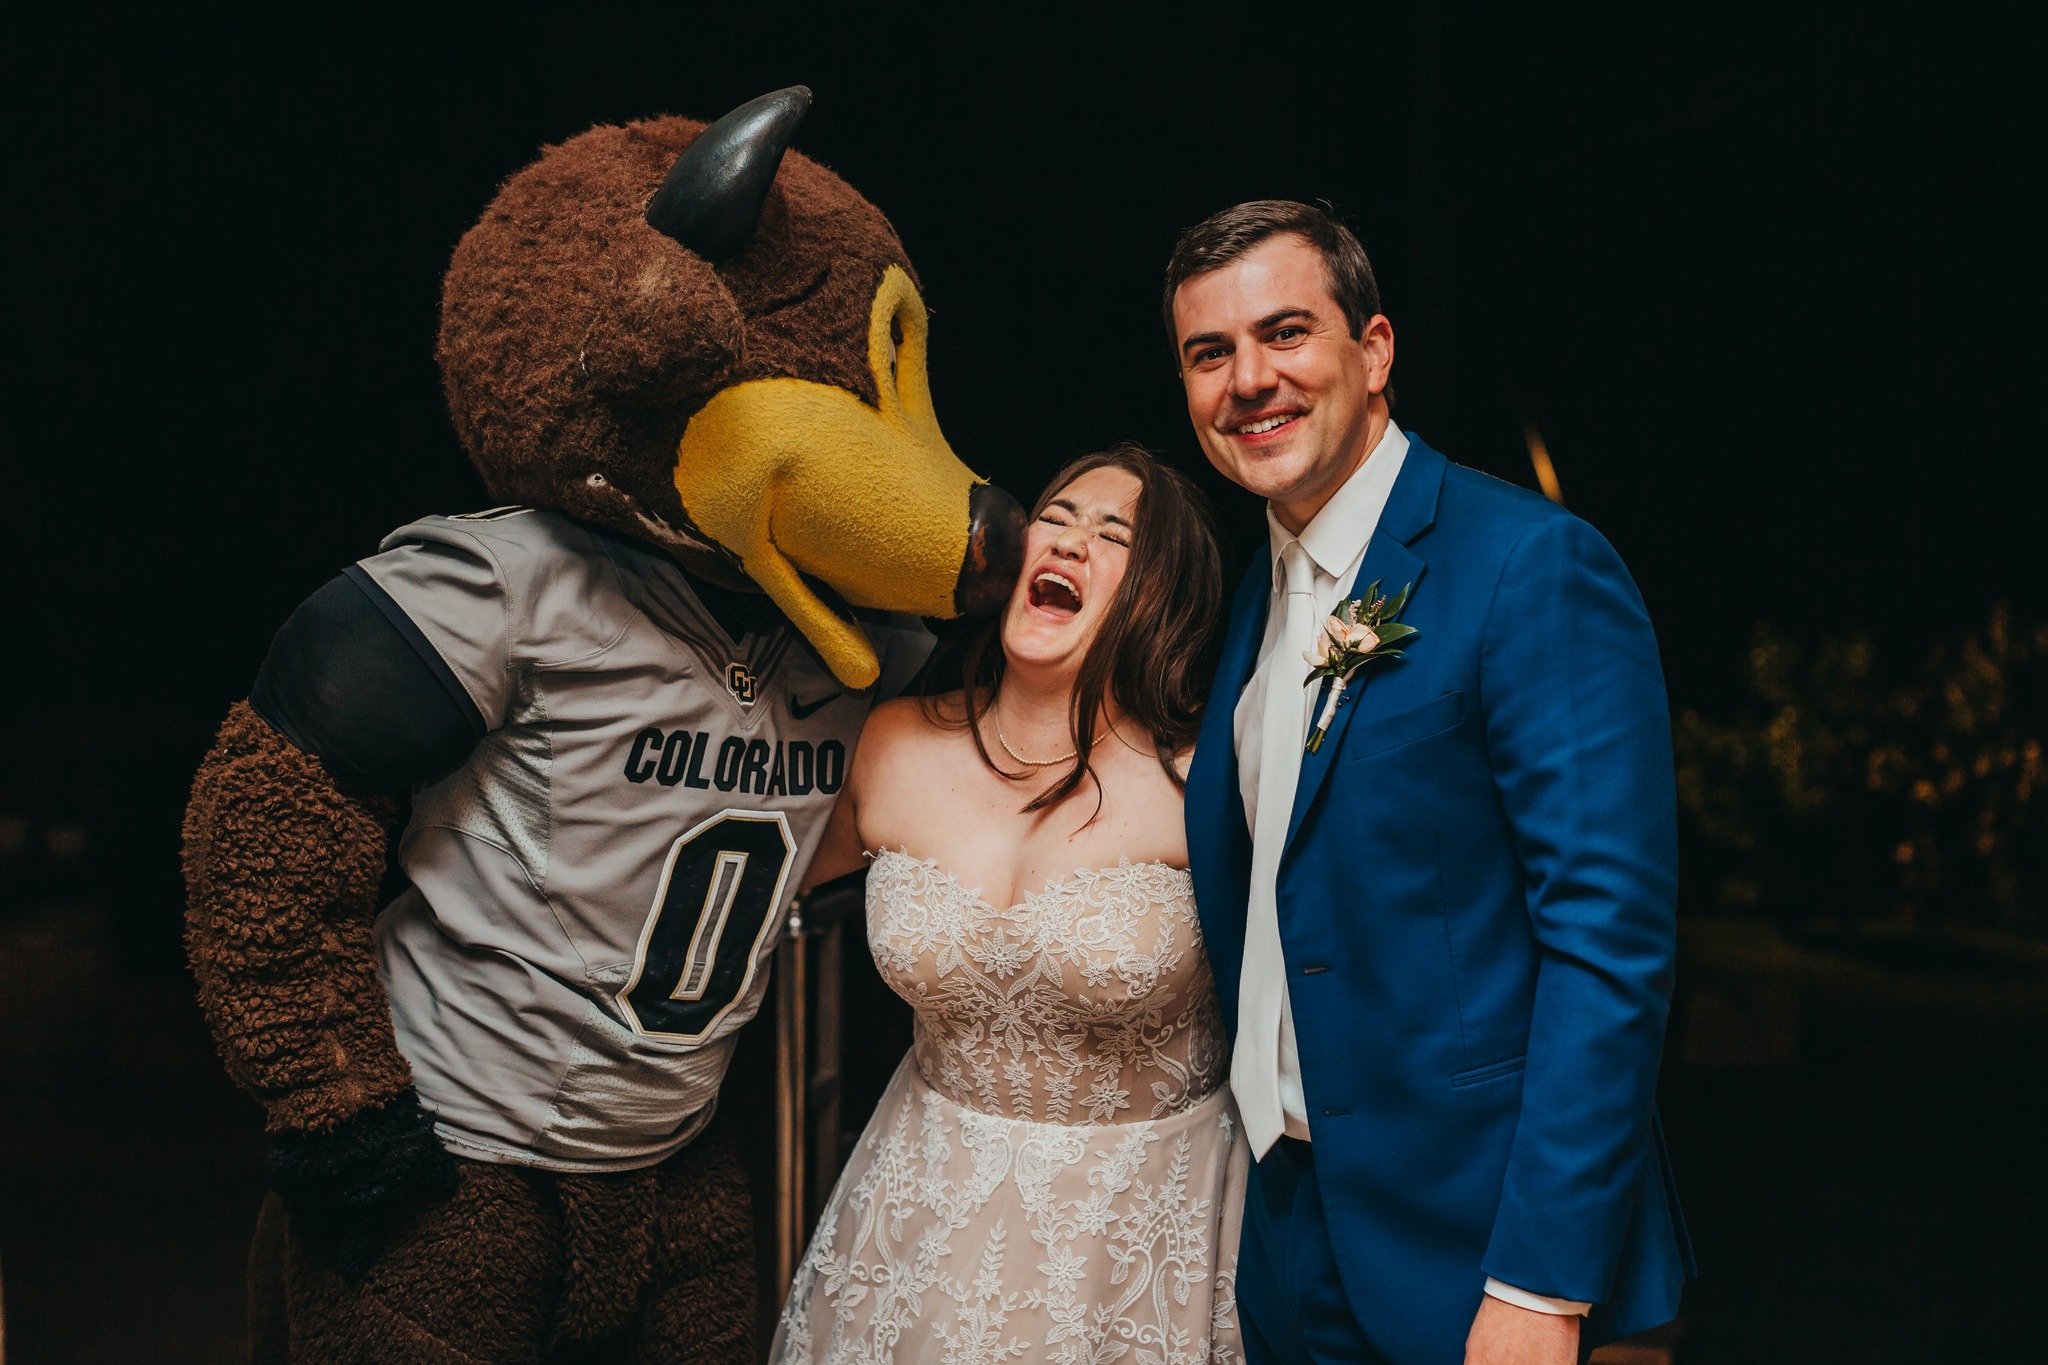 Happy graduation buffs! 🖤🦬💛 When you're ready to tie the knot, Chip says we are the best in the biz 🤪

Makeup: Mari
📷: @tyler.paigephotography 
👰: @dyoung5 
👗: @emmaandgracebridal.denver